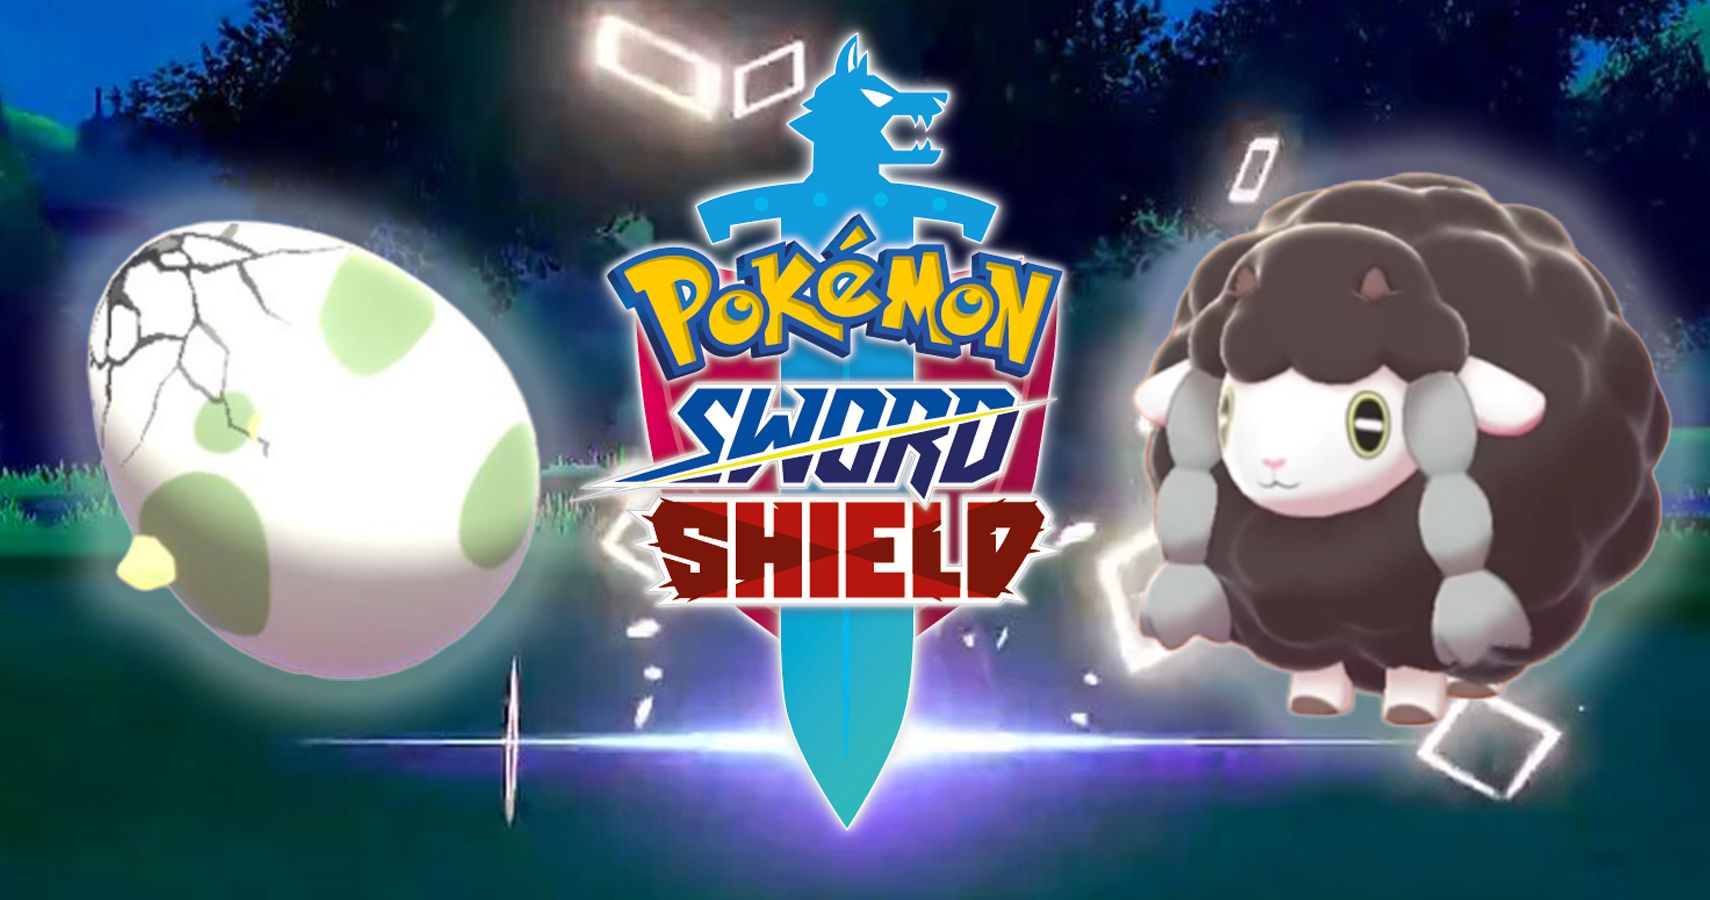 Pokémon Sword & Shield: The Difference Between Star And Square Shiny Pokemon